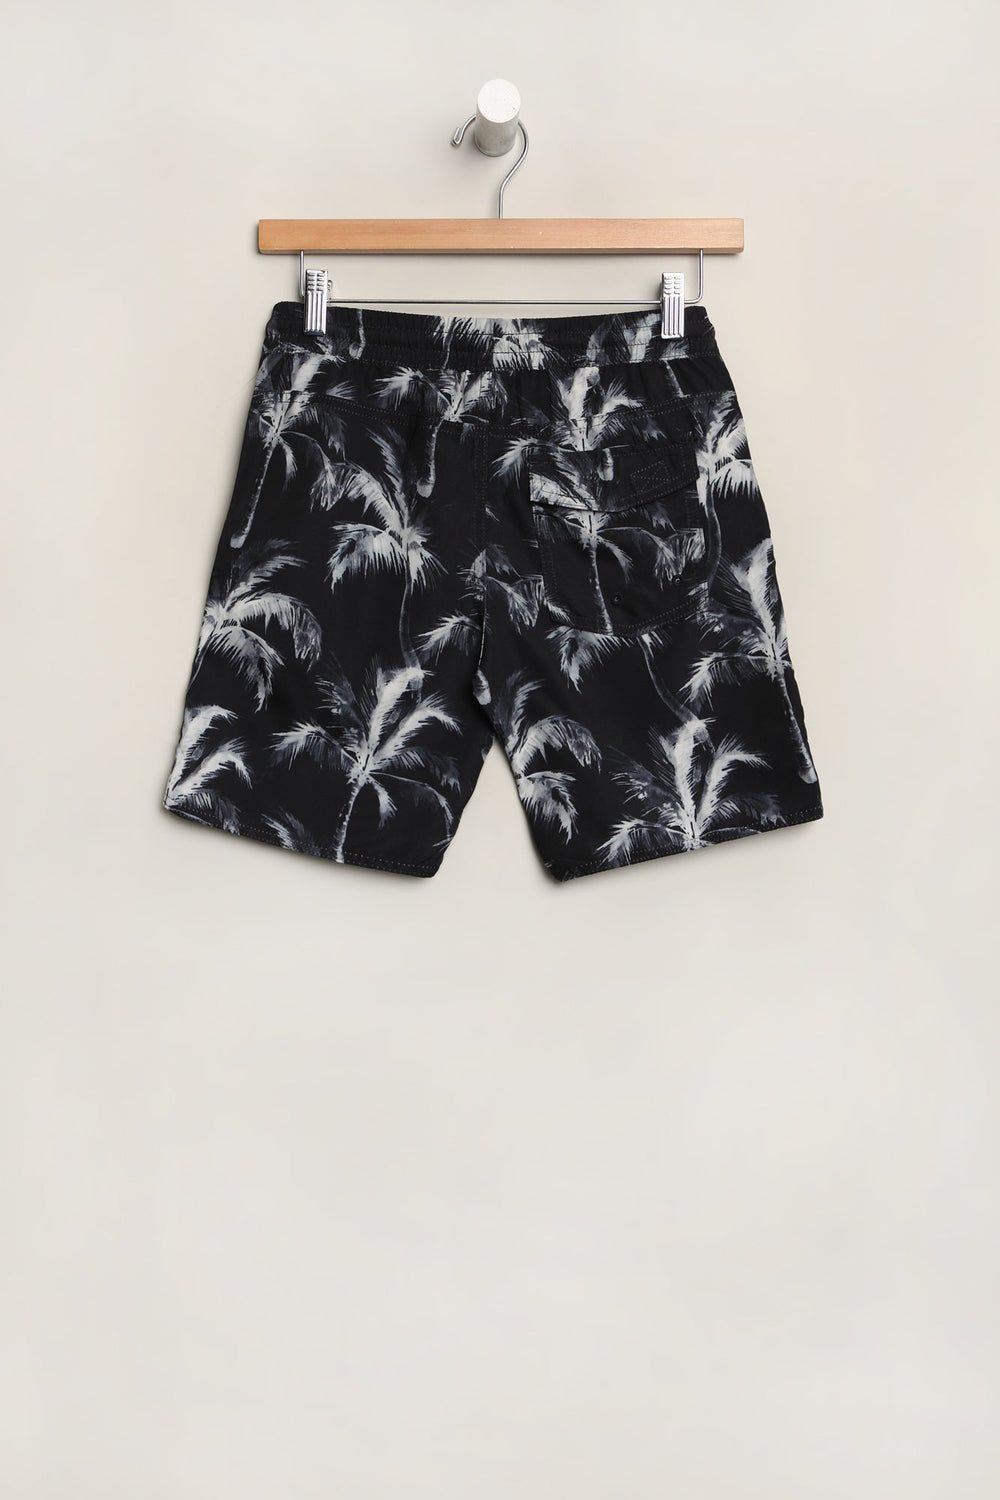 West49 Youth Palm Tree Print Beach Shorts West49 Youth Palm Tree Print Beach Shorts